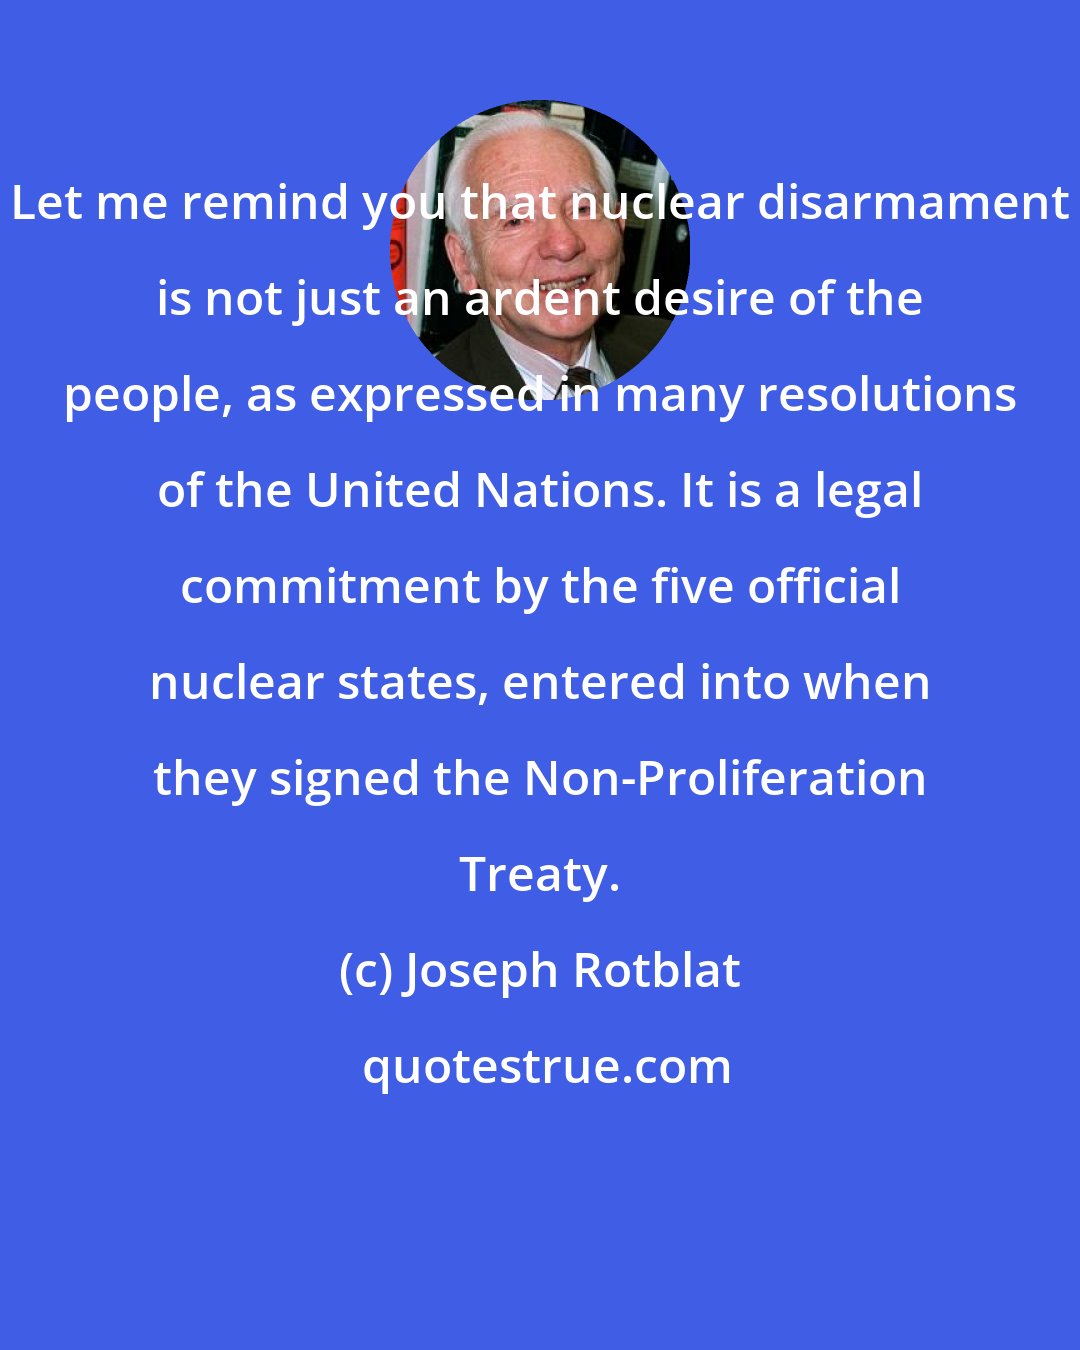 Joseph Rotblat: Let me remind you that nuclear disarmament is not just an ardent desire of the people, as expressed in many resolutions of the United Nations. It is a legal commitment by the five official nuclear states, entered into when they signed the Non-Proliferation Treaty.